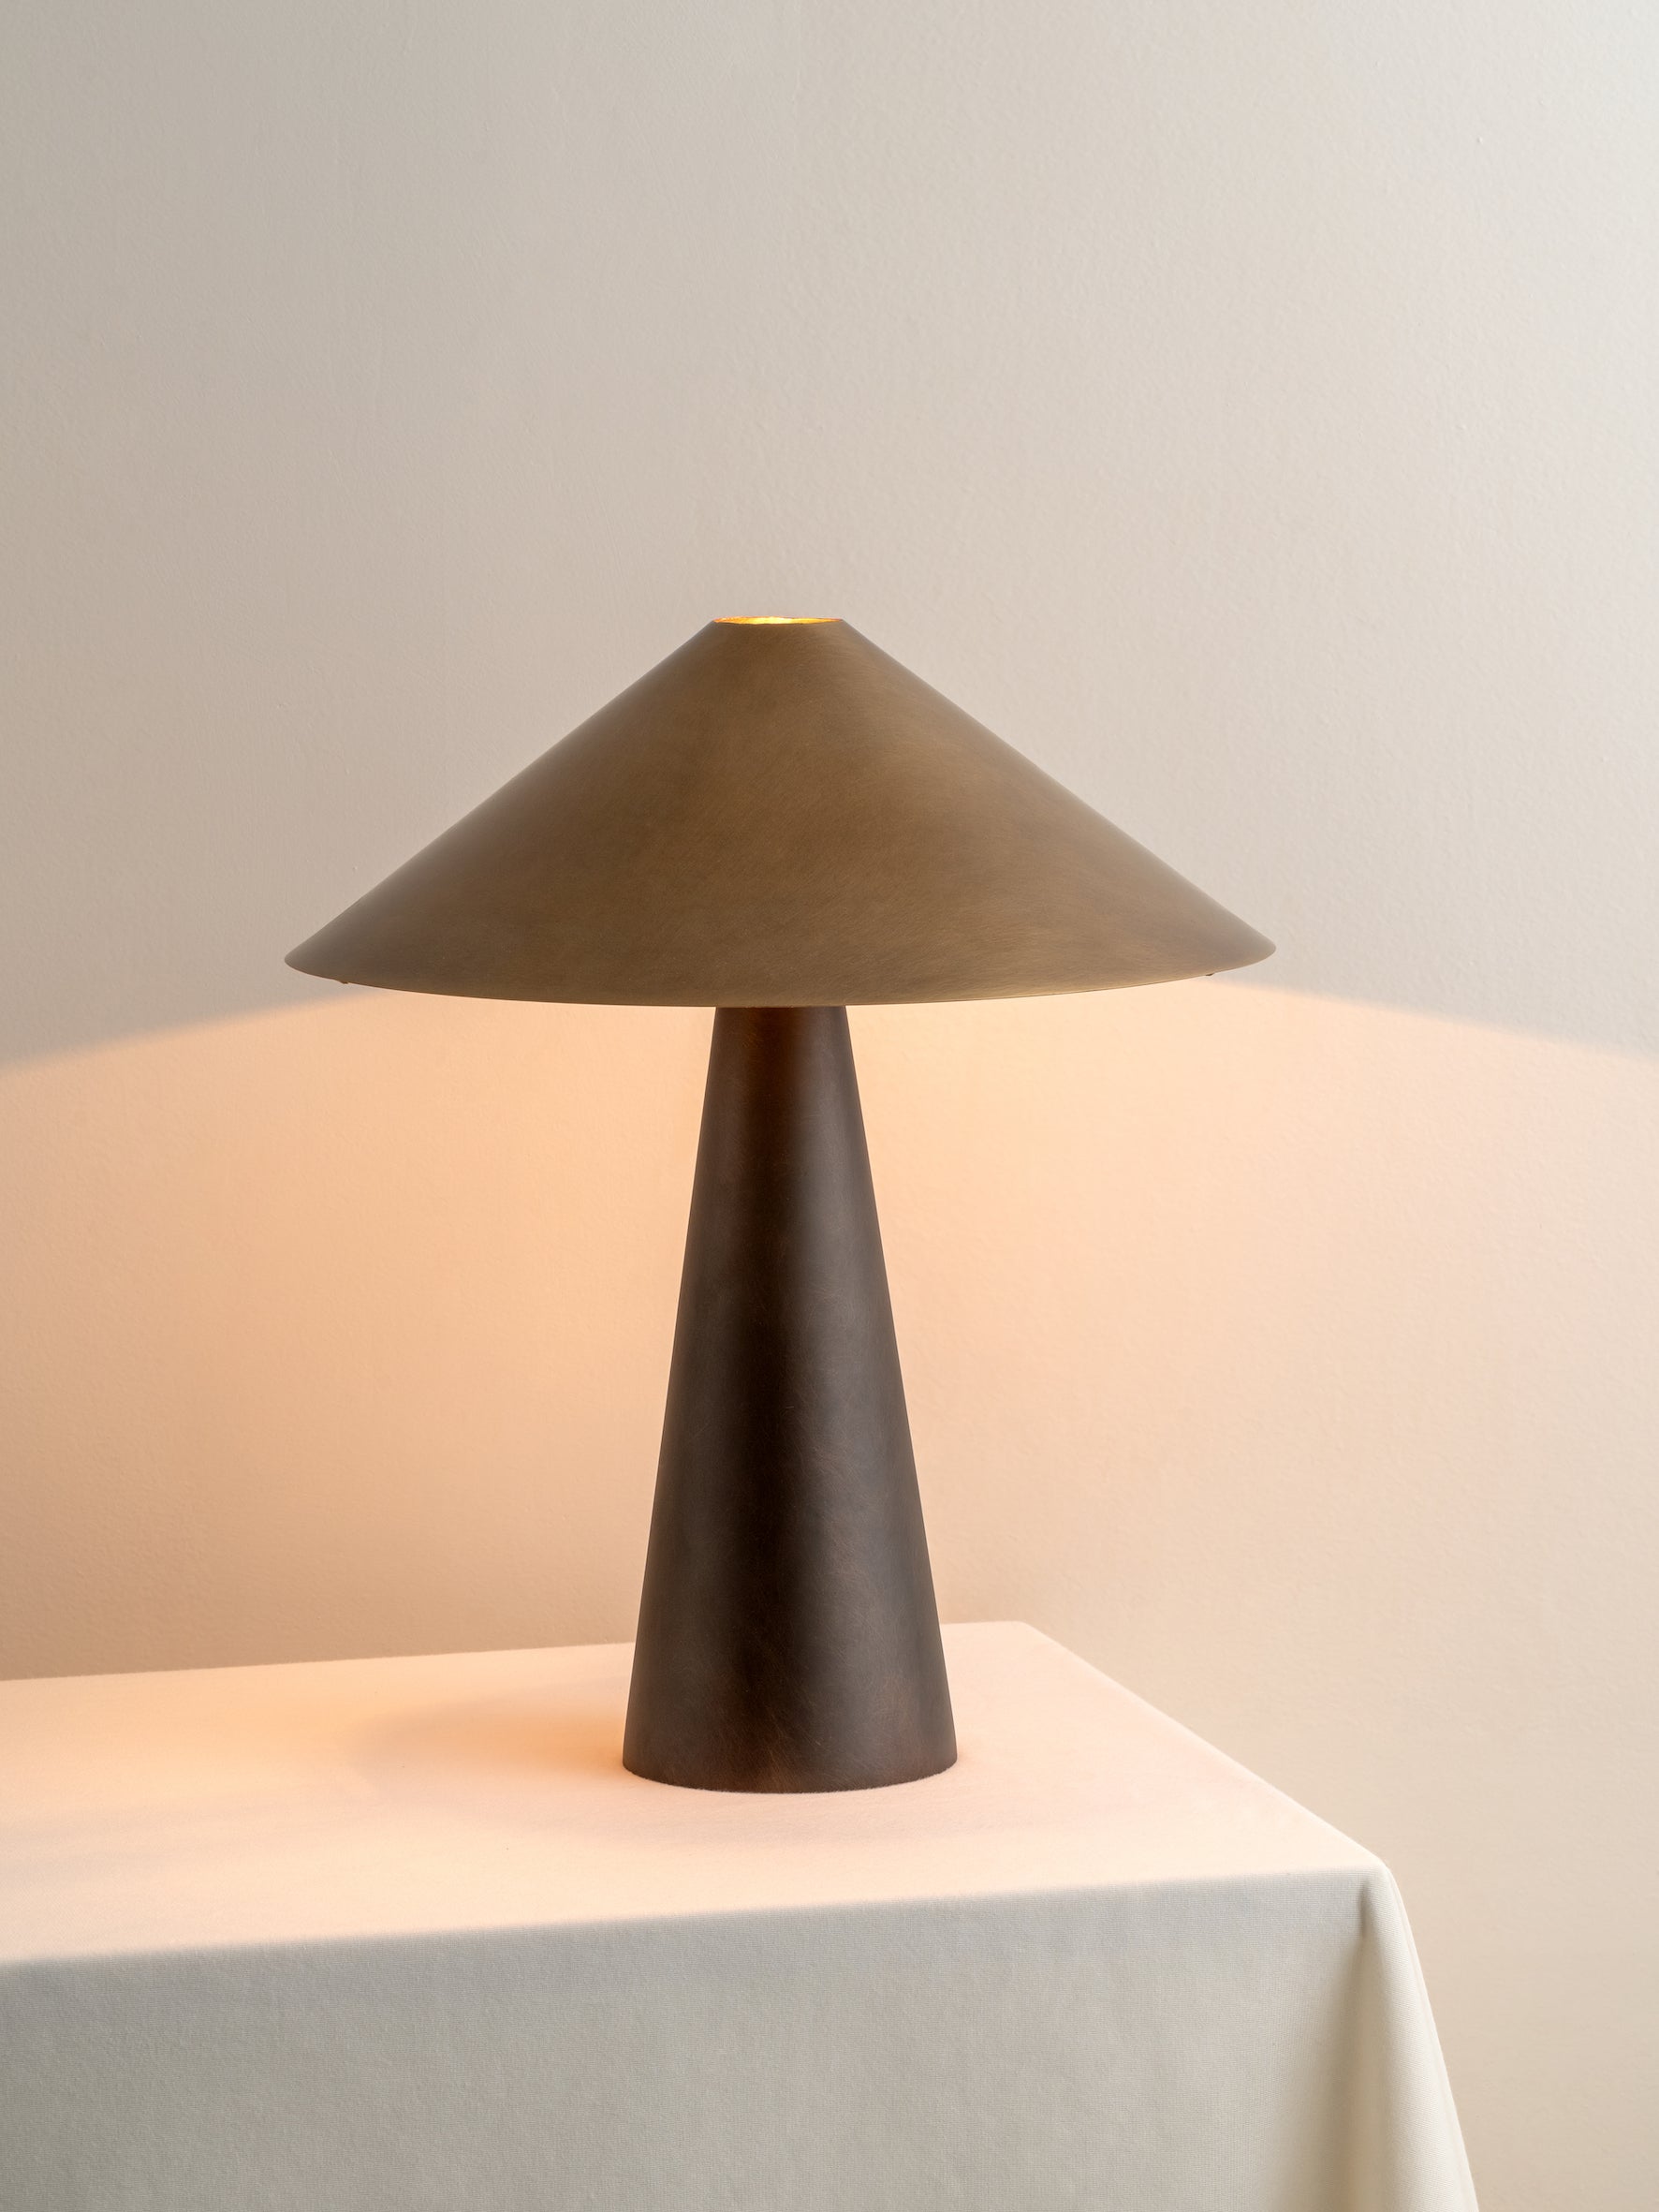 Orta - aged brass and bronze cone table lamp | Table Lamp | Lights & Lamps | UK | Modern Affordable Designer Lighting